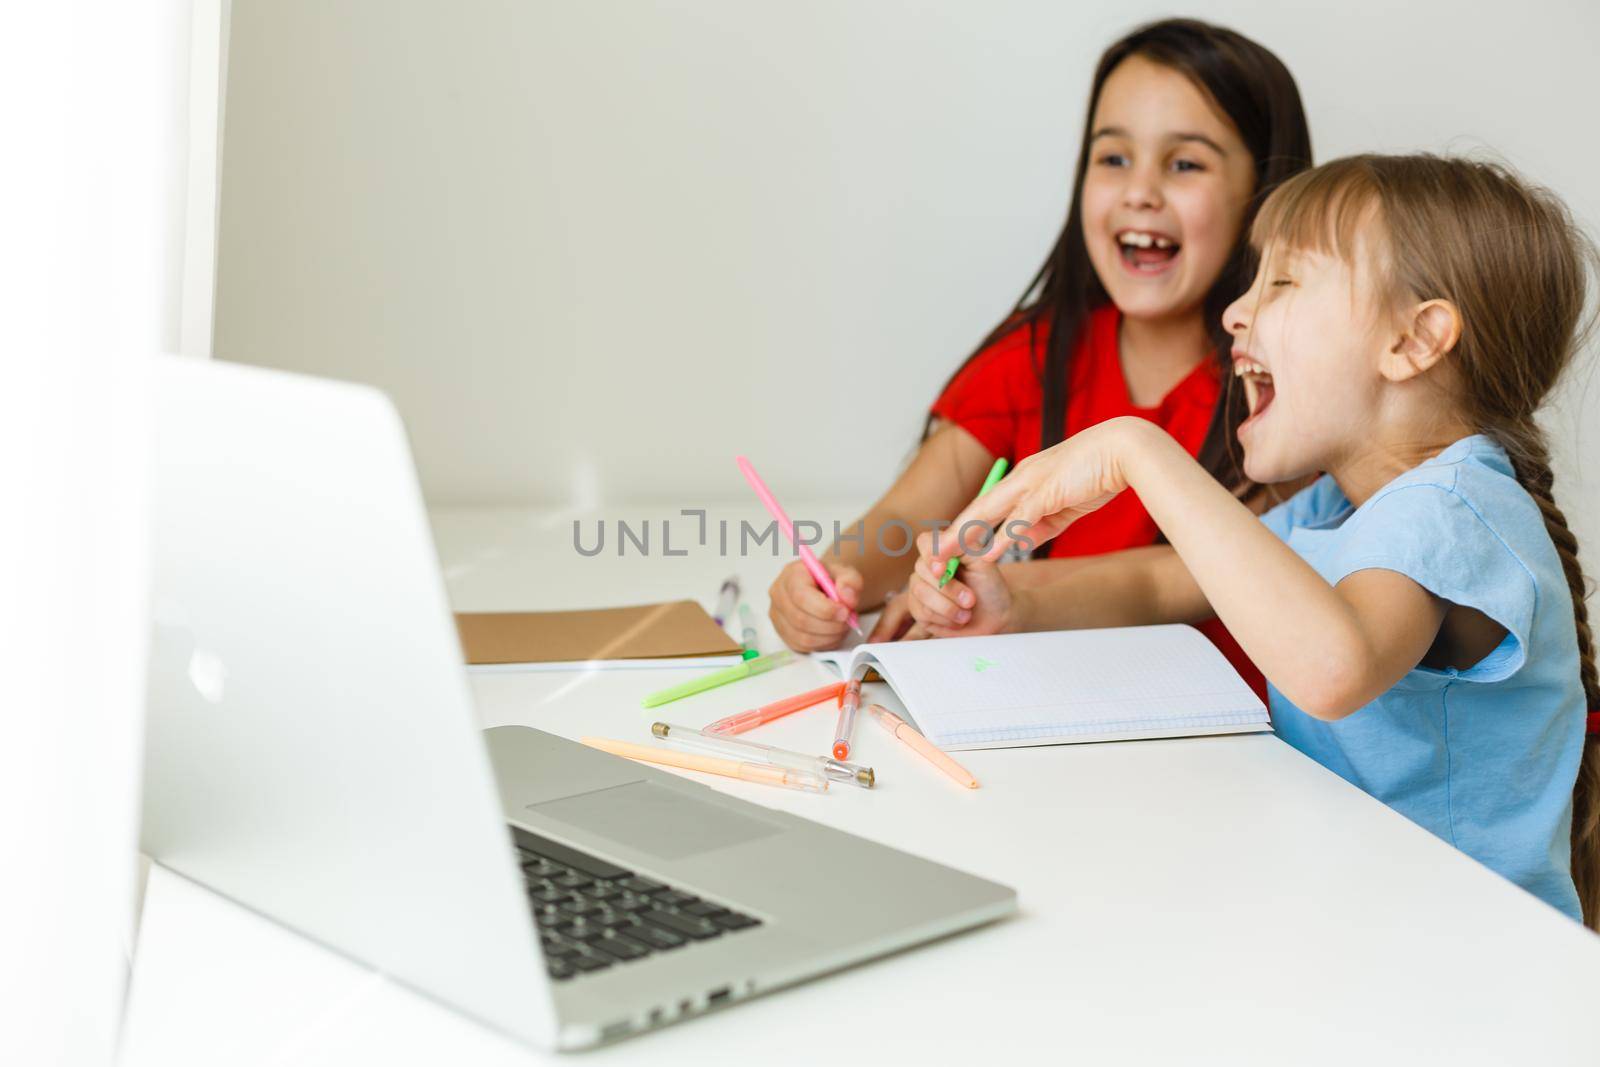 Cool online school. Kids studying online at home using a laptop. Cheerful young little girls using laptop computer studying through online e-learning system. Distance or remote learning